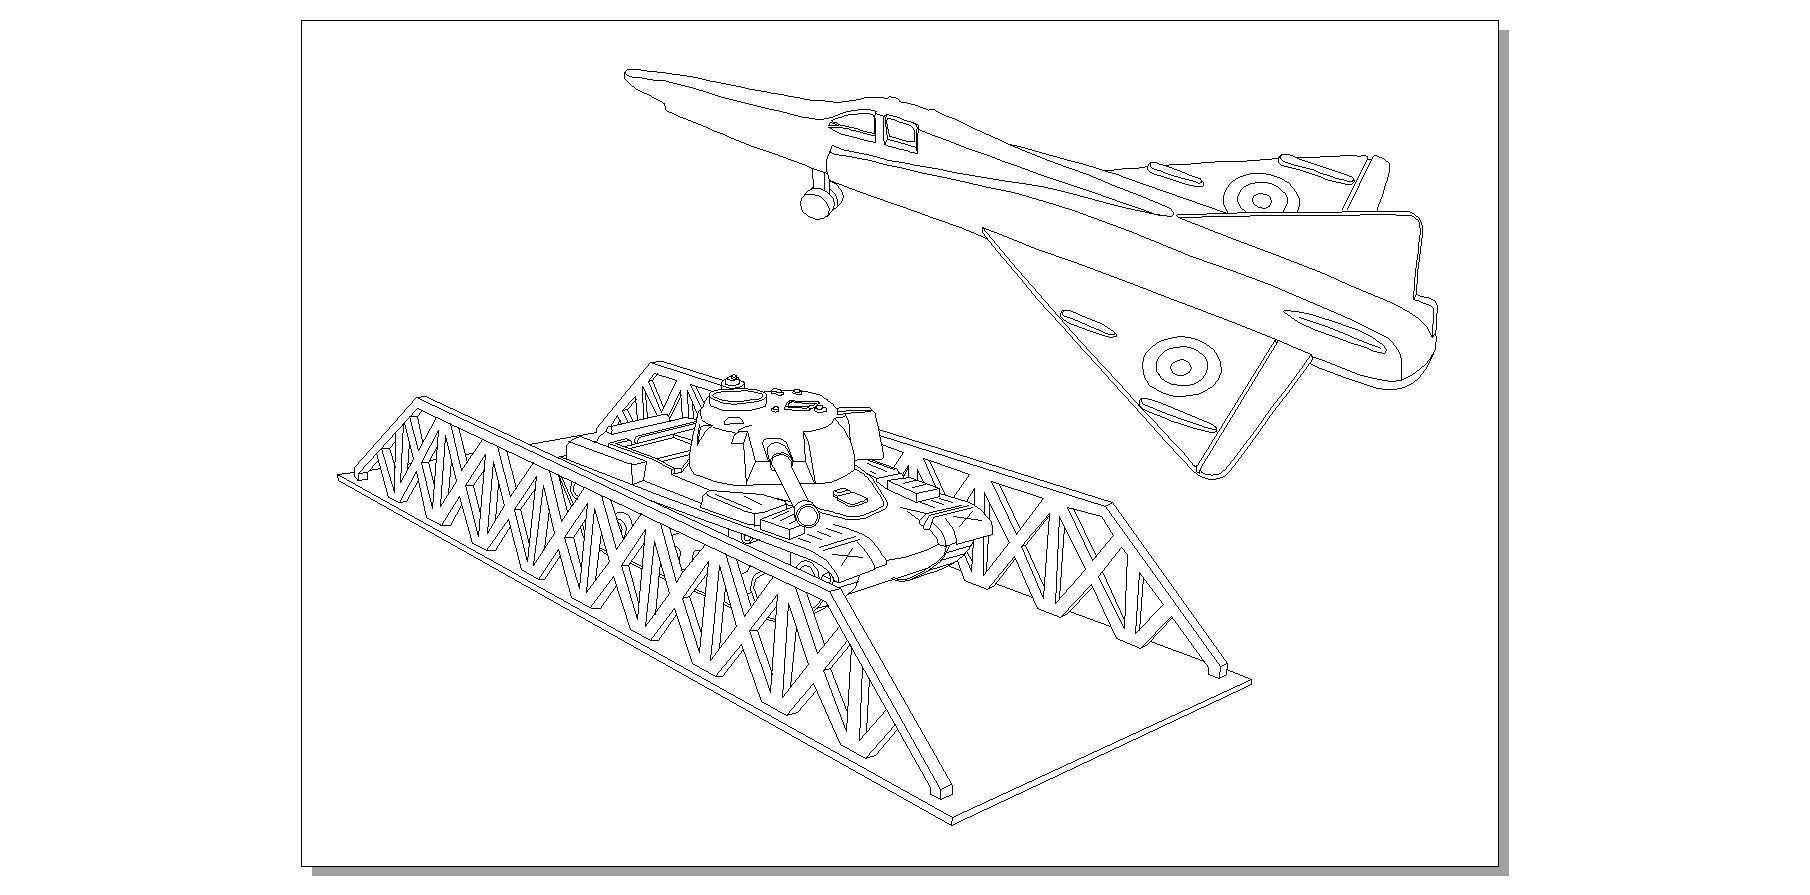 Army Tank and Aircraft Colouring Page